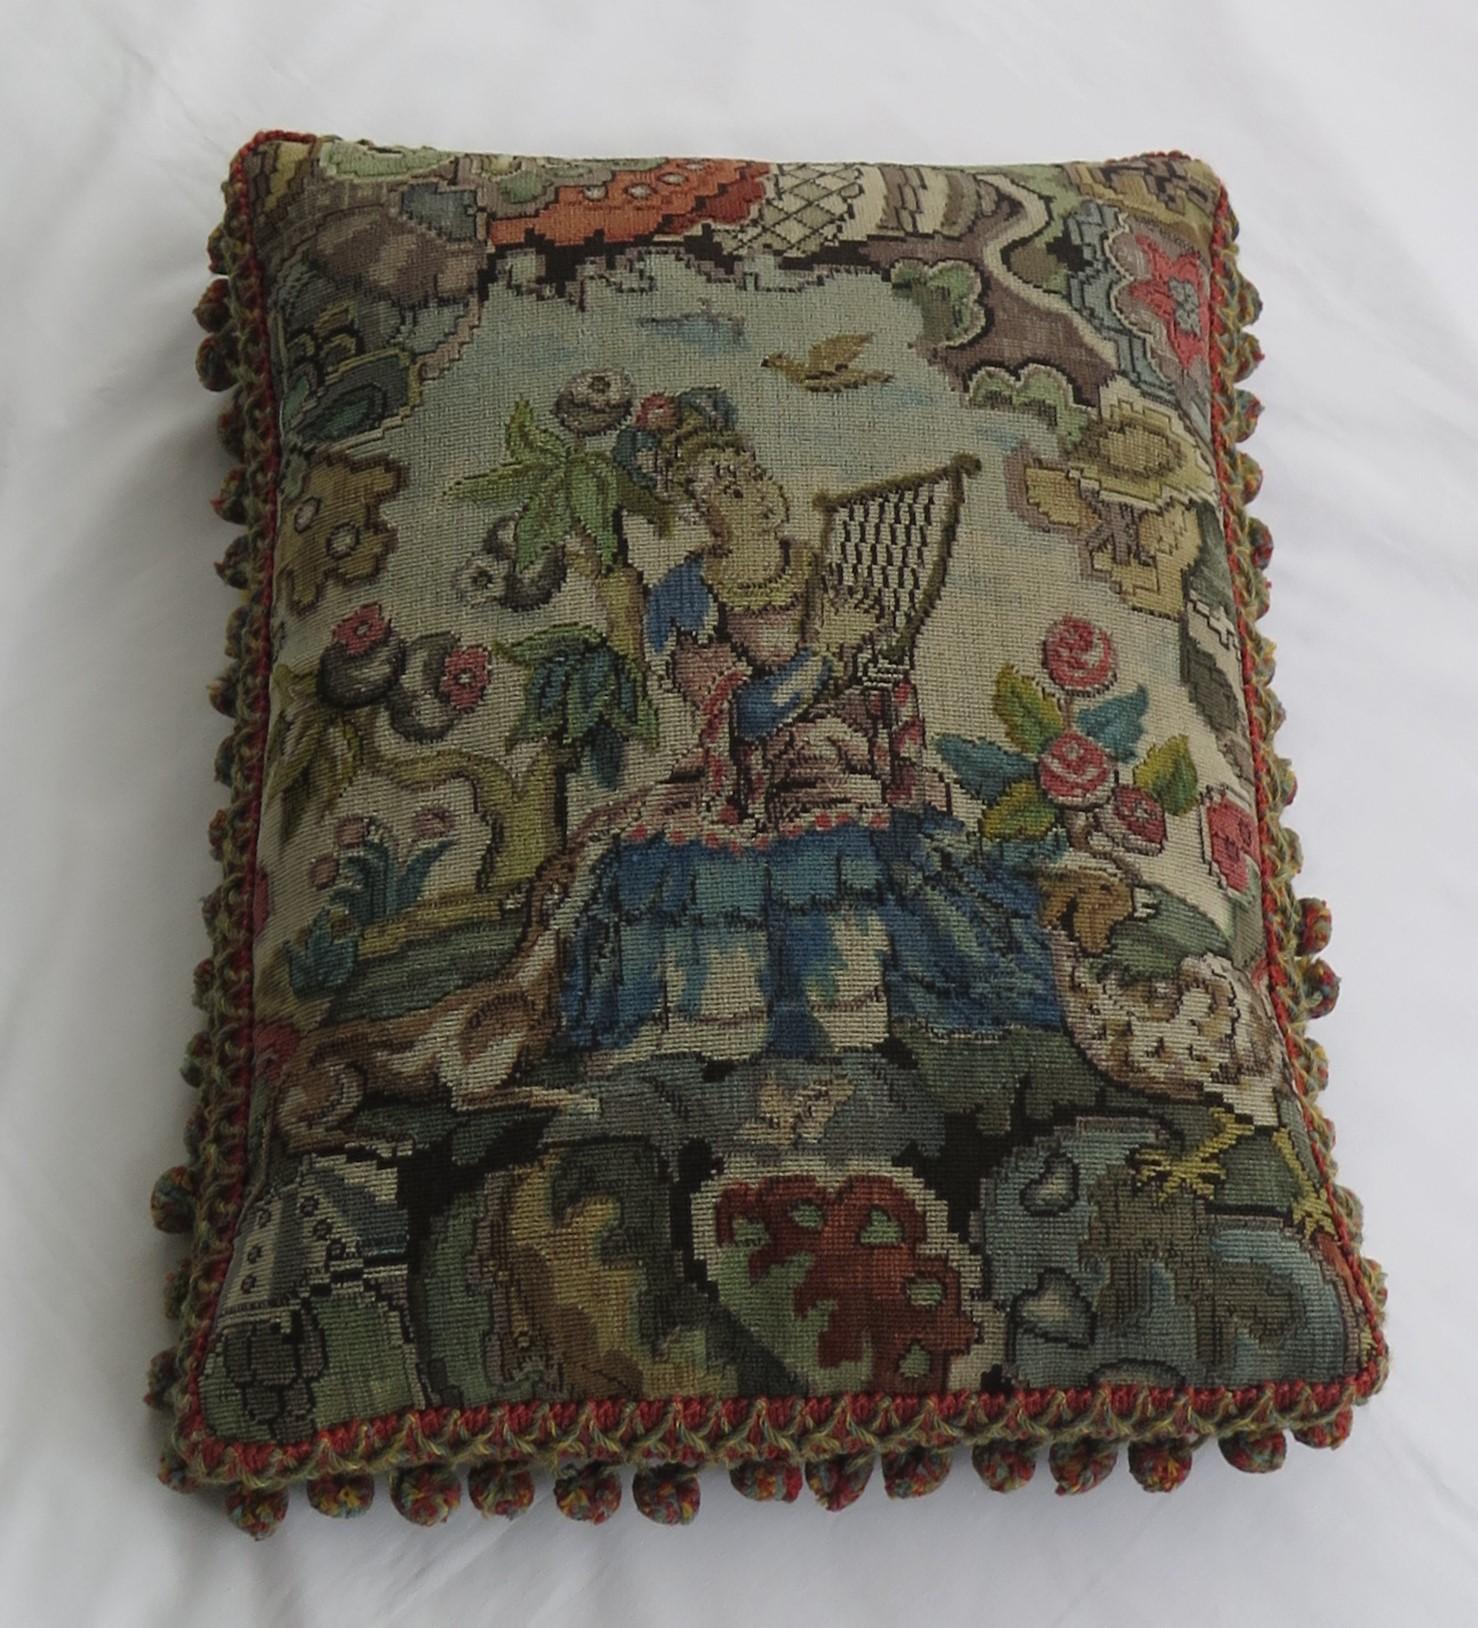 Woven Tapestry Cushion or Pillow in Aubusson style, French, 19th Century 1